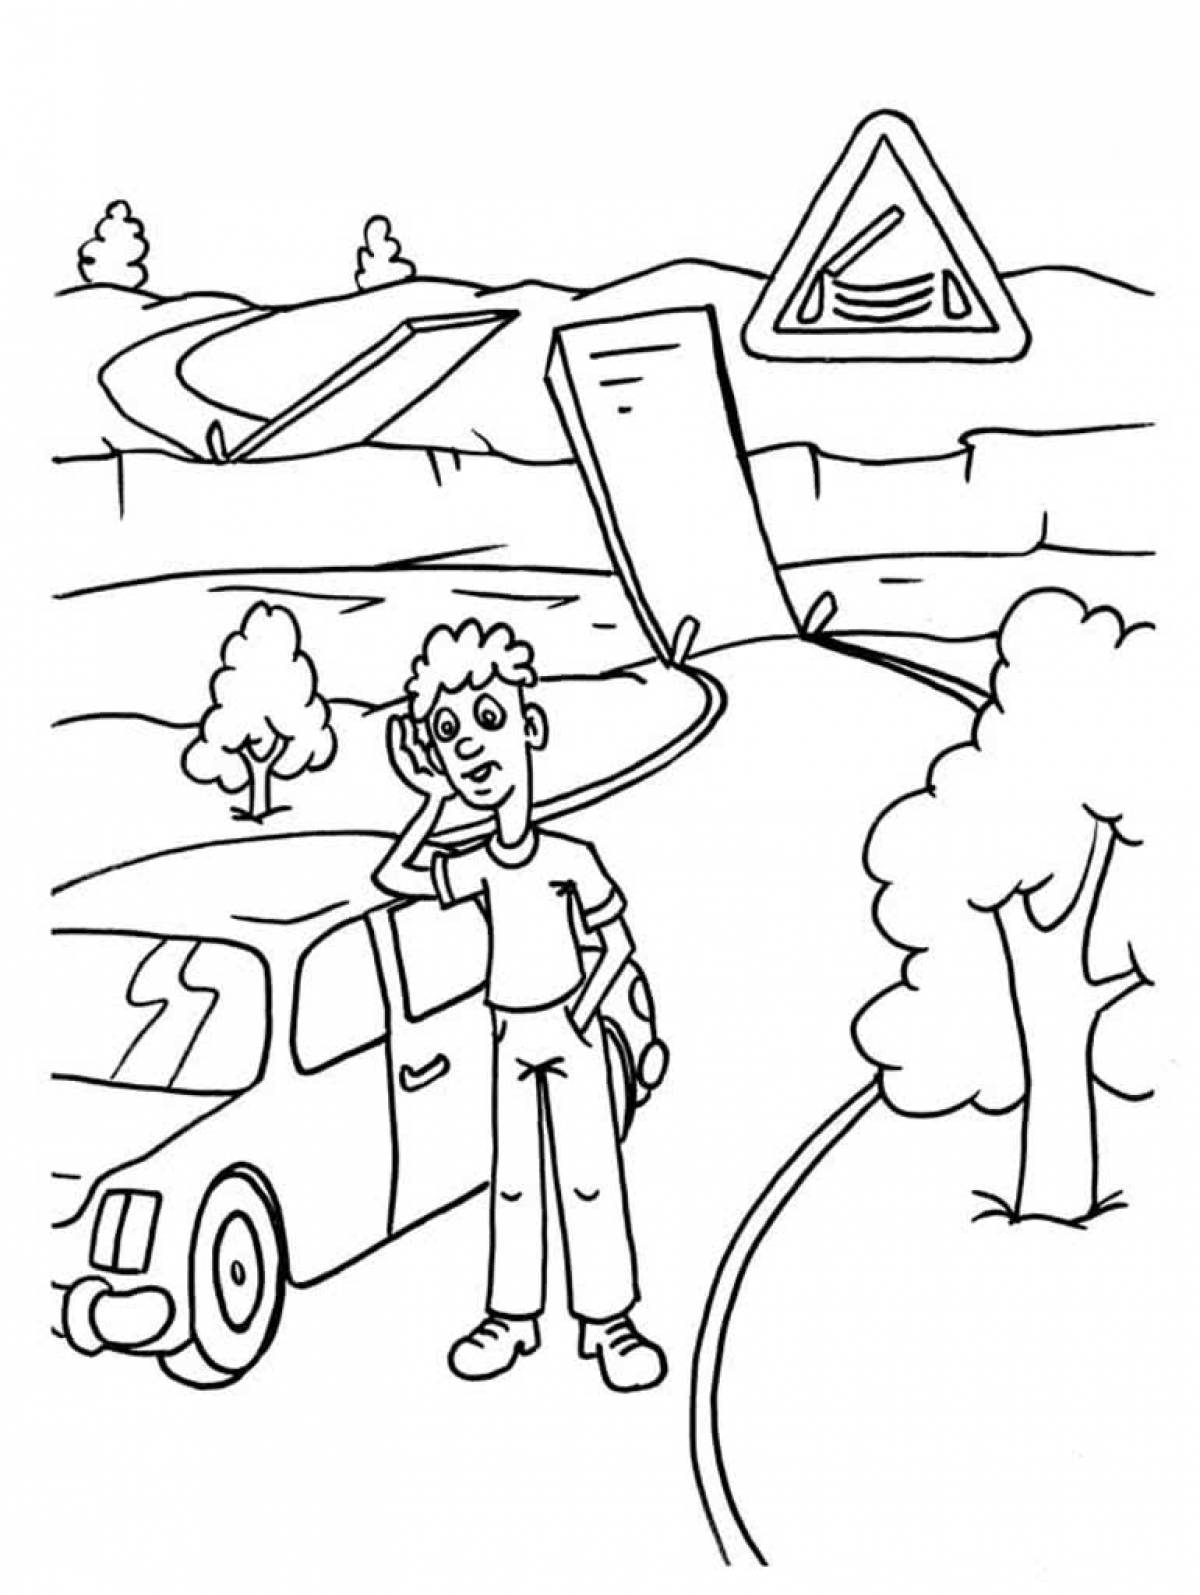 Fancy road of life coloring pages for kids